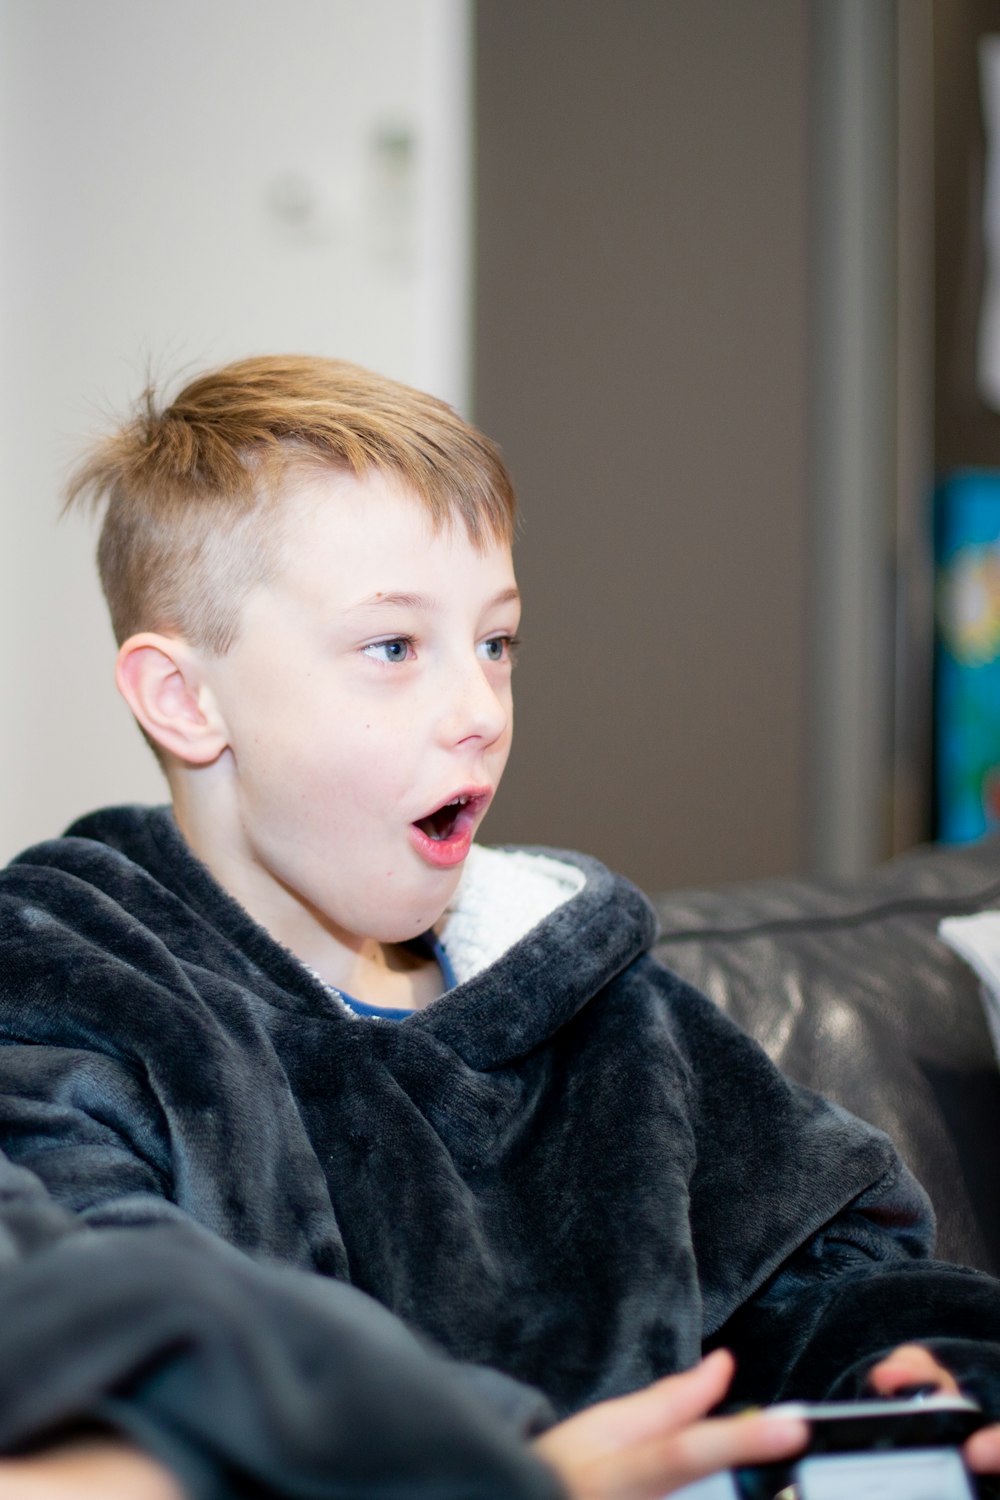 a young boy sitting on a couch holding a remote control